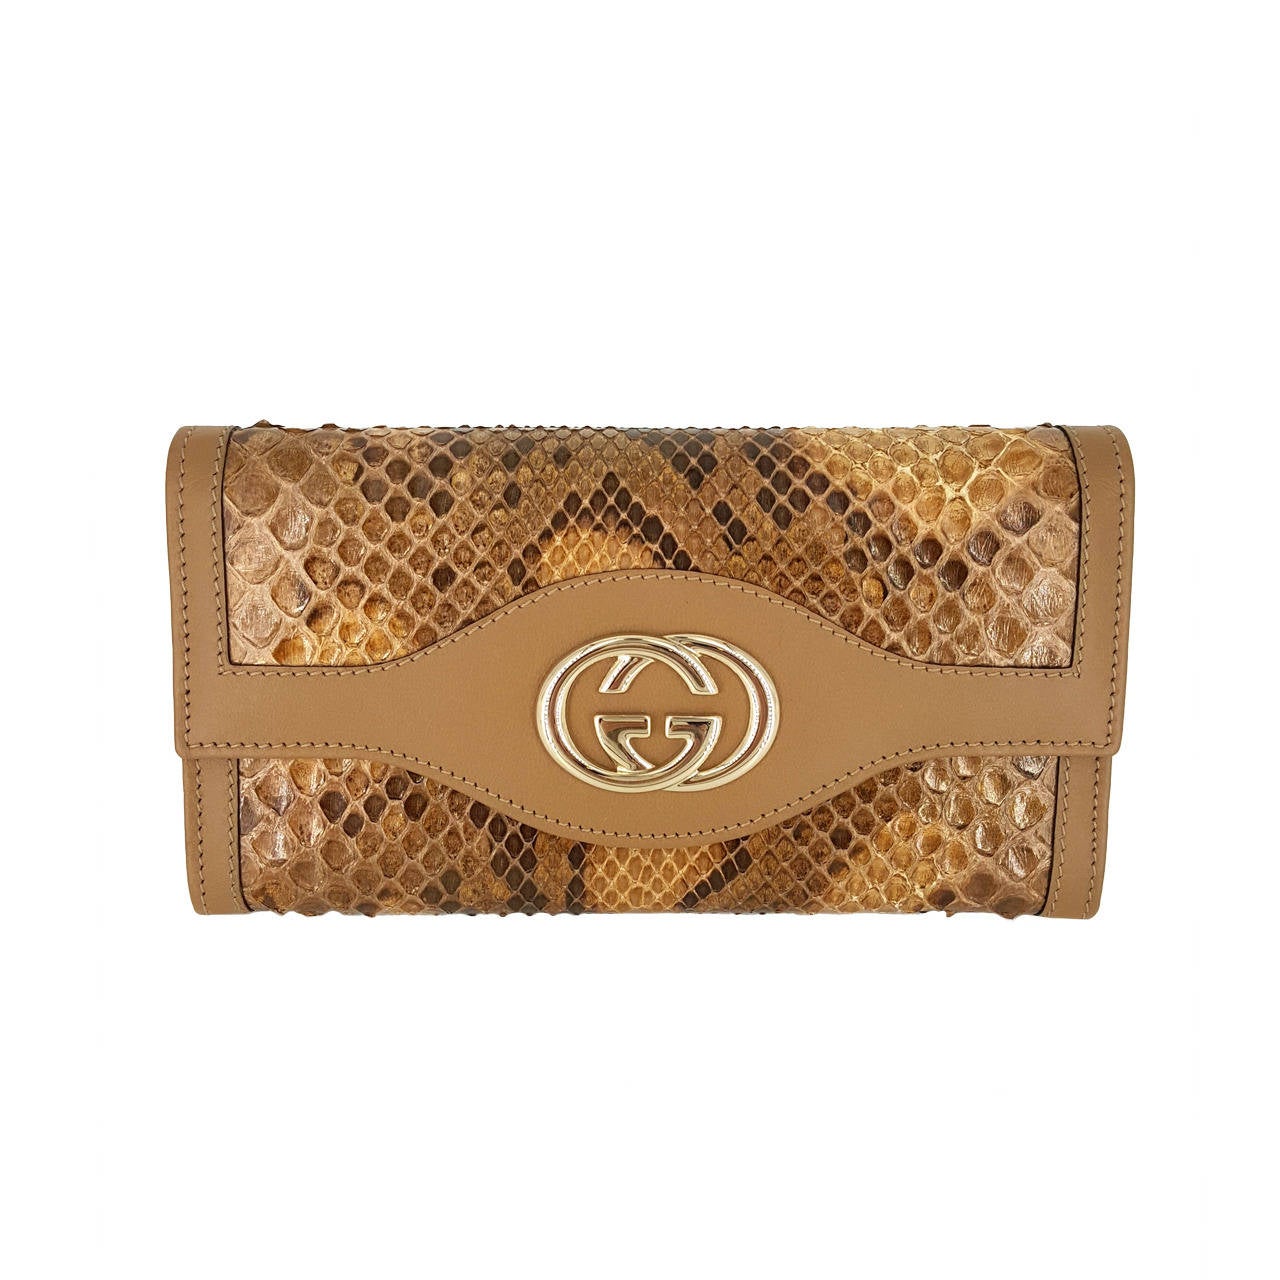 Gucci Python Wallet With Gold Hardware- Never Used.